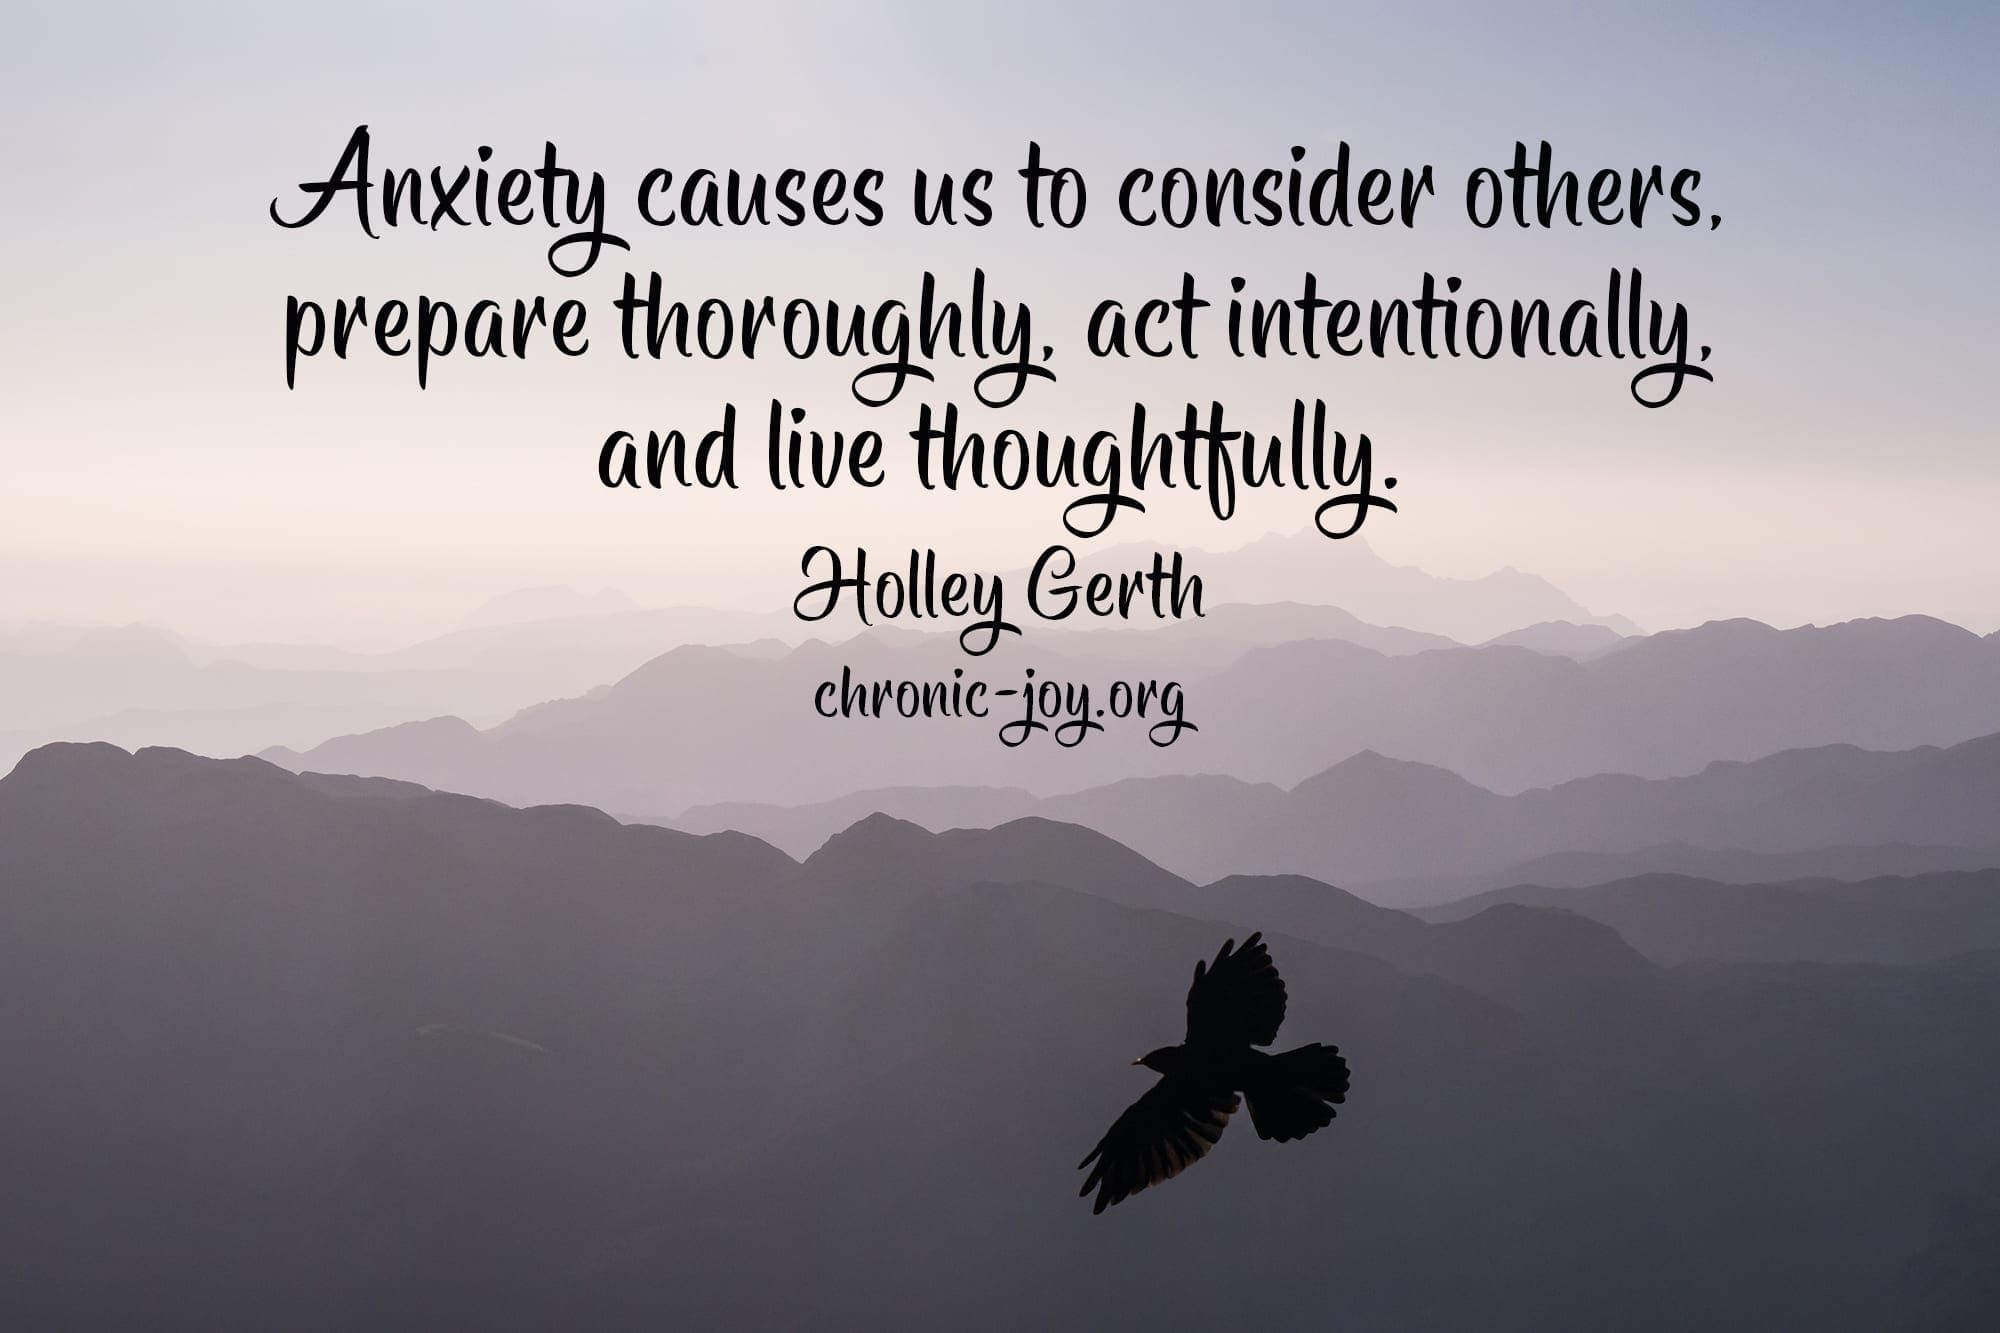 "Anxiety causes us to consider others, prepare thoroughly, act intentionally, and live thoughtfully." Holley Gerth